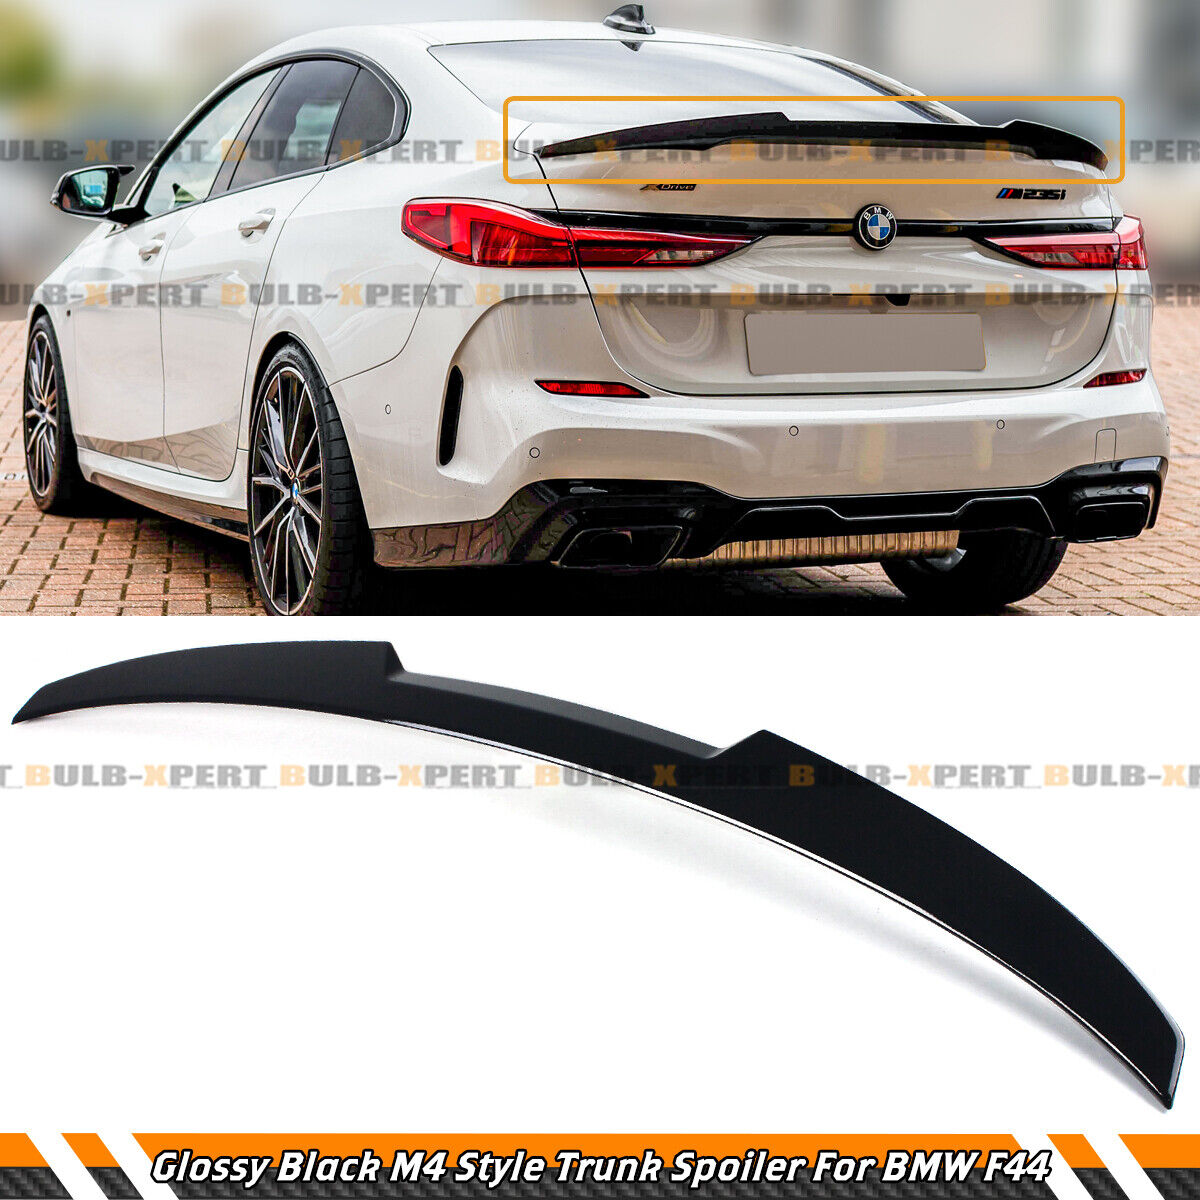 FOR 2020-22 BMW F44 228i M235i GRAN COUPE BLACK M4 STYLE HIGHKICK TRUNK SPOILER